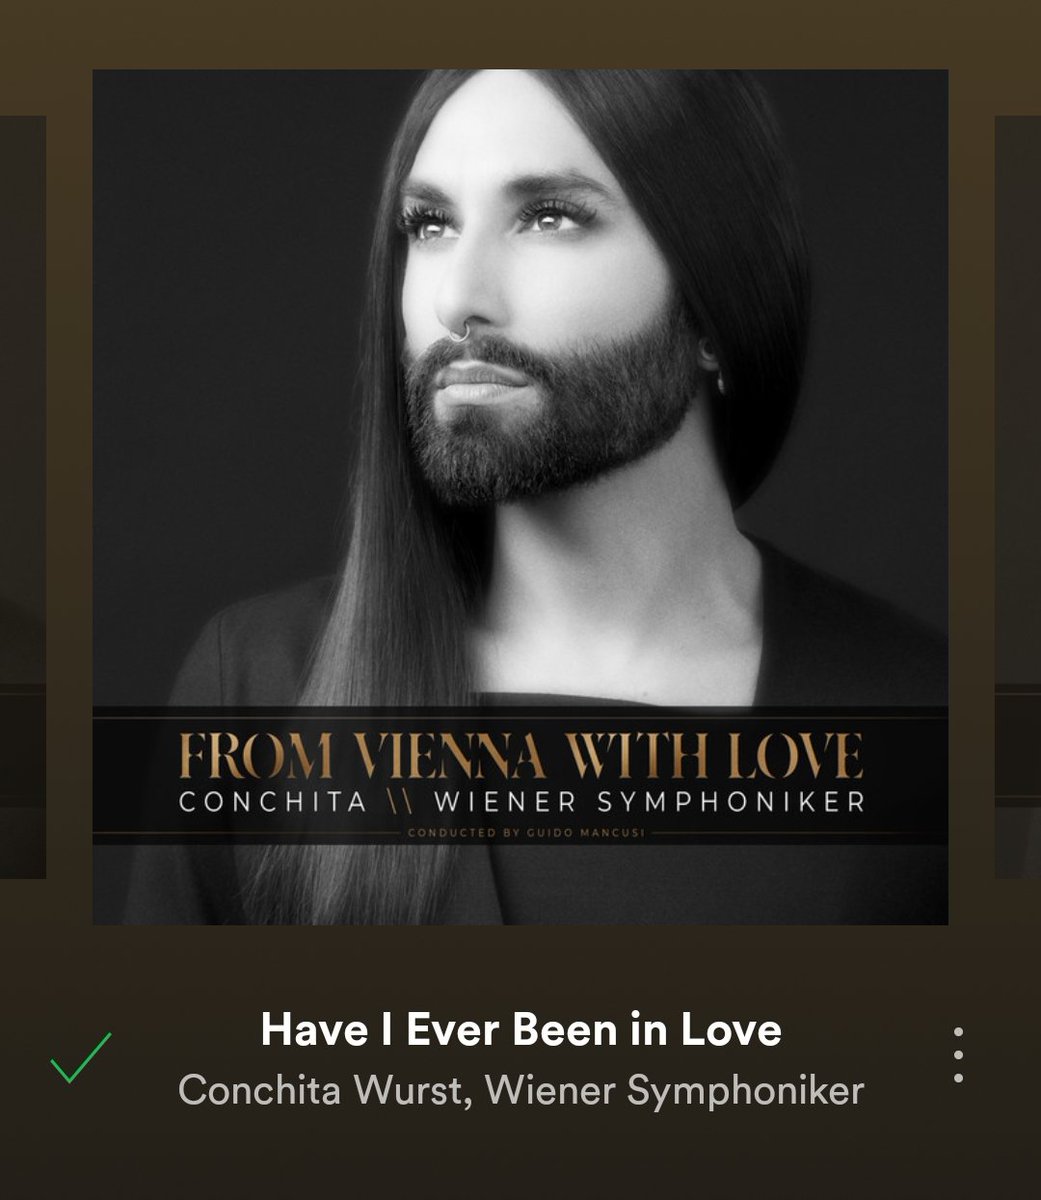 @RecordingAcad My favorite song of 2018:
open.spotify.com/track/2a66QvjD…
'Have I ever been in love?' by @ConchitaWurst 🎤🎤🎤❤️❤️❤️ #theunstoppables #SongOfTheYear #albumsyoumusthear #FromViennaWithLove #conchita #tomneuwirth #wienersymphoniker #viennasymphonyorchestra #newalbum